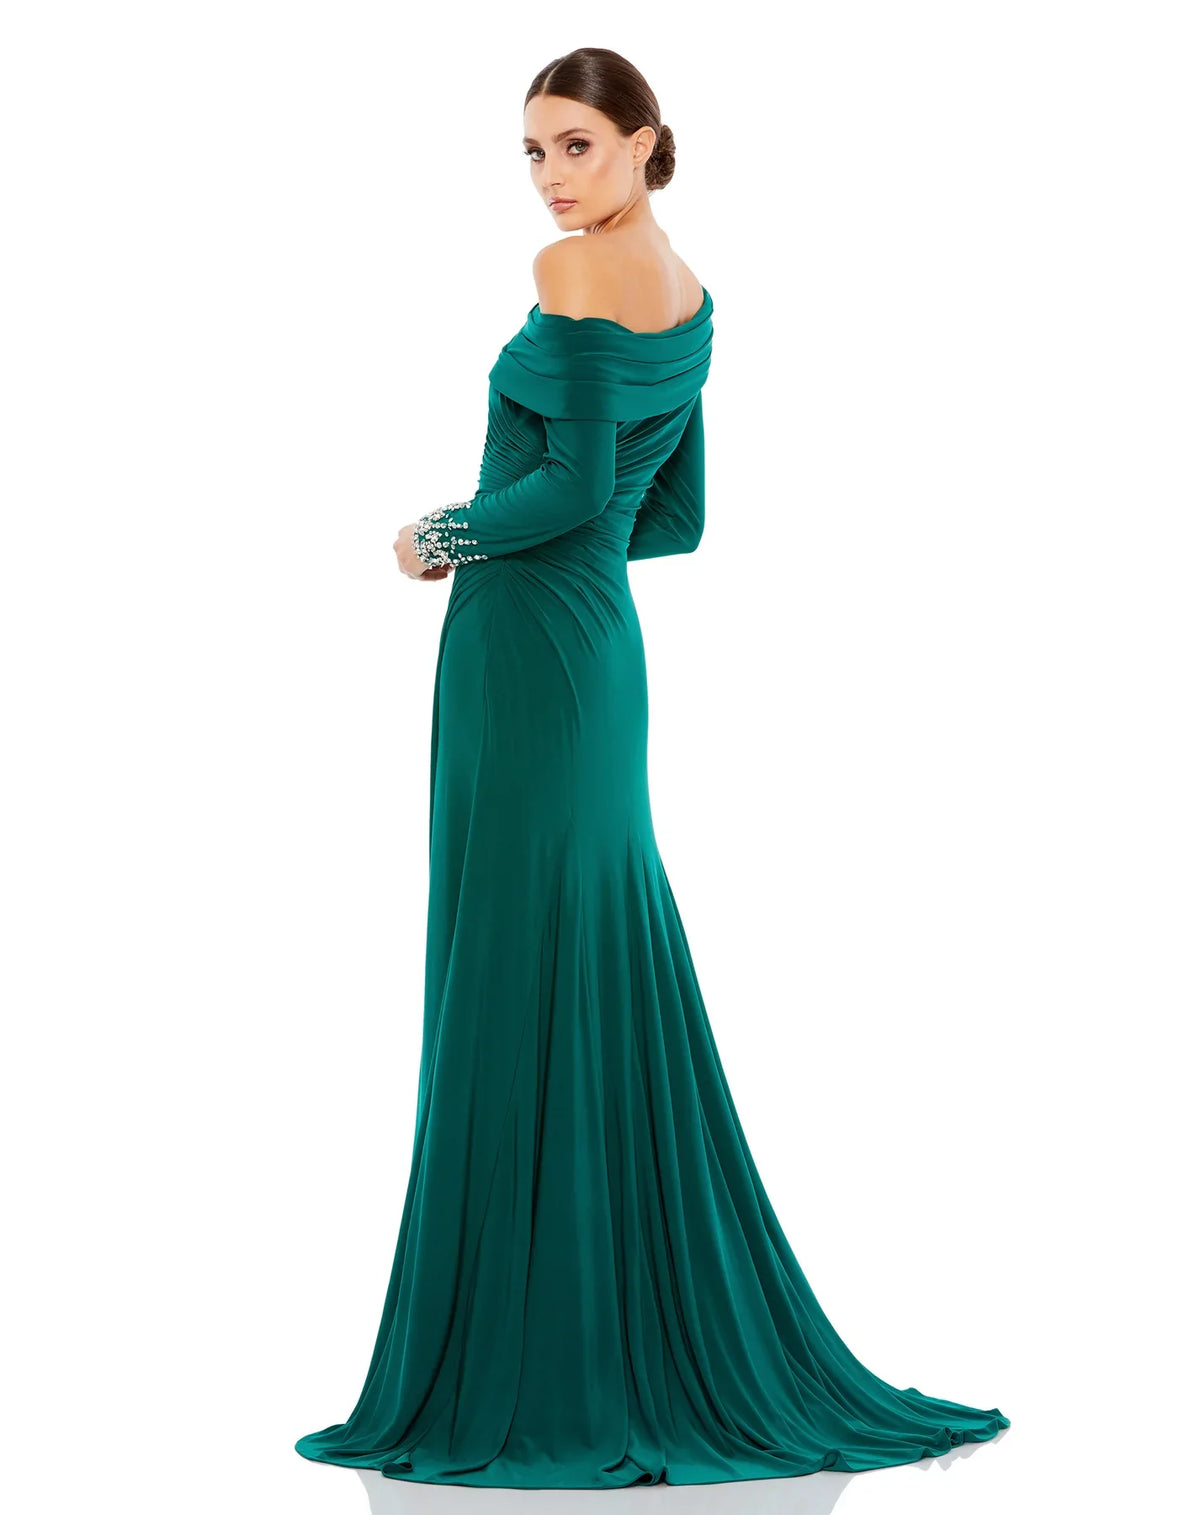 This stunningly elegant, floor-length, emerald green Mac Duggal, evening dress is a long sleeve jersey gown accented with jewelled cuffs and finished with a thigh-high slit! This bodycon, form-fitting evening gown is perfect for proms, black-tie affairs, weddings and special events back view